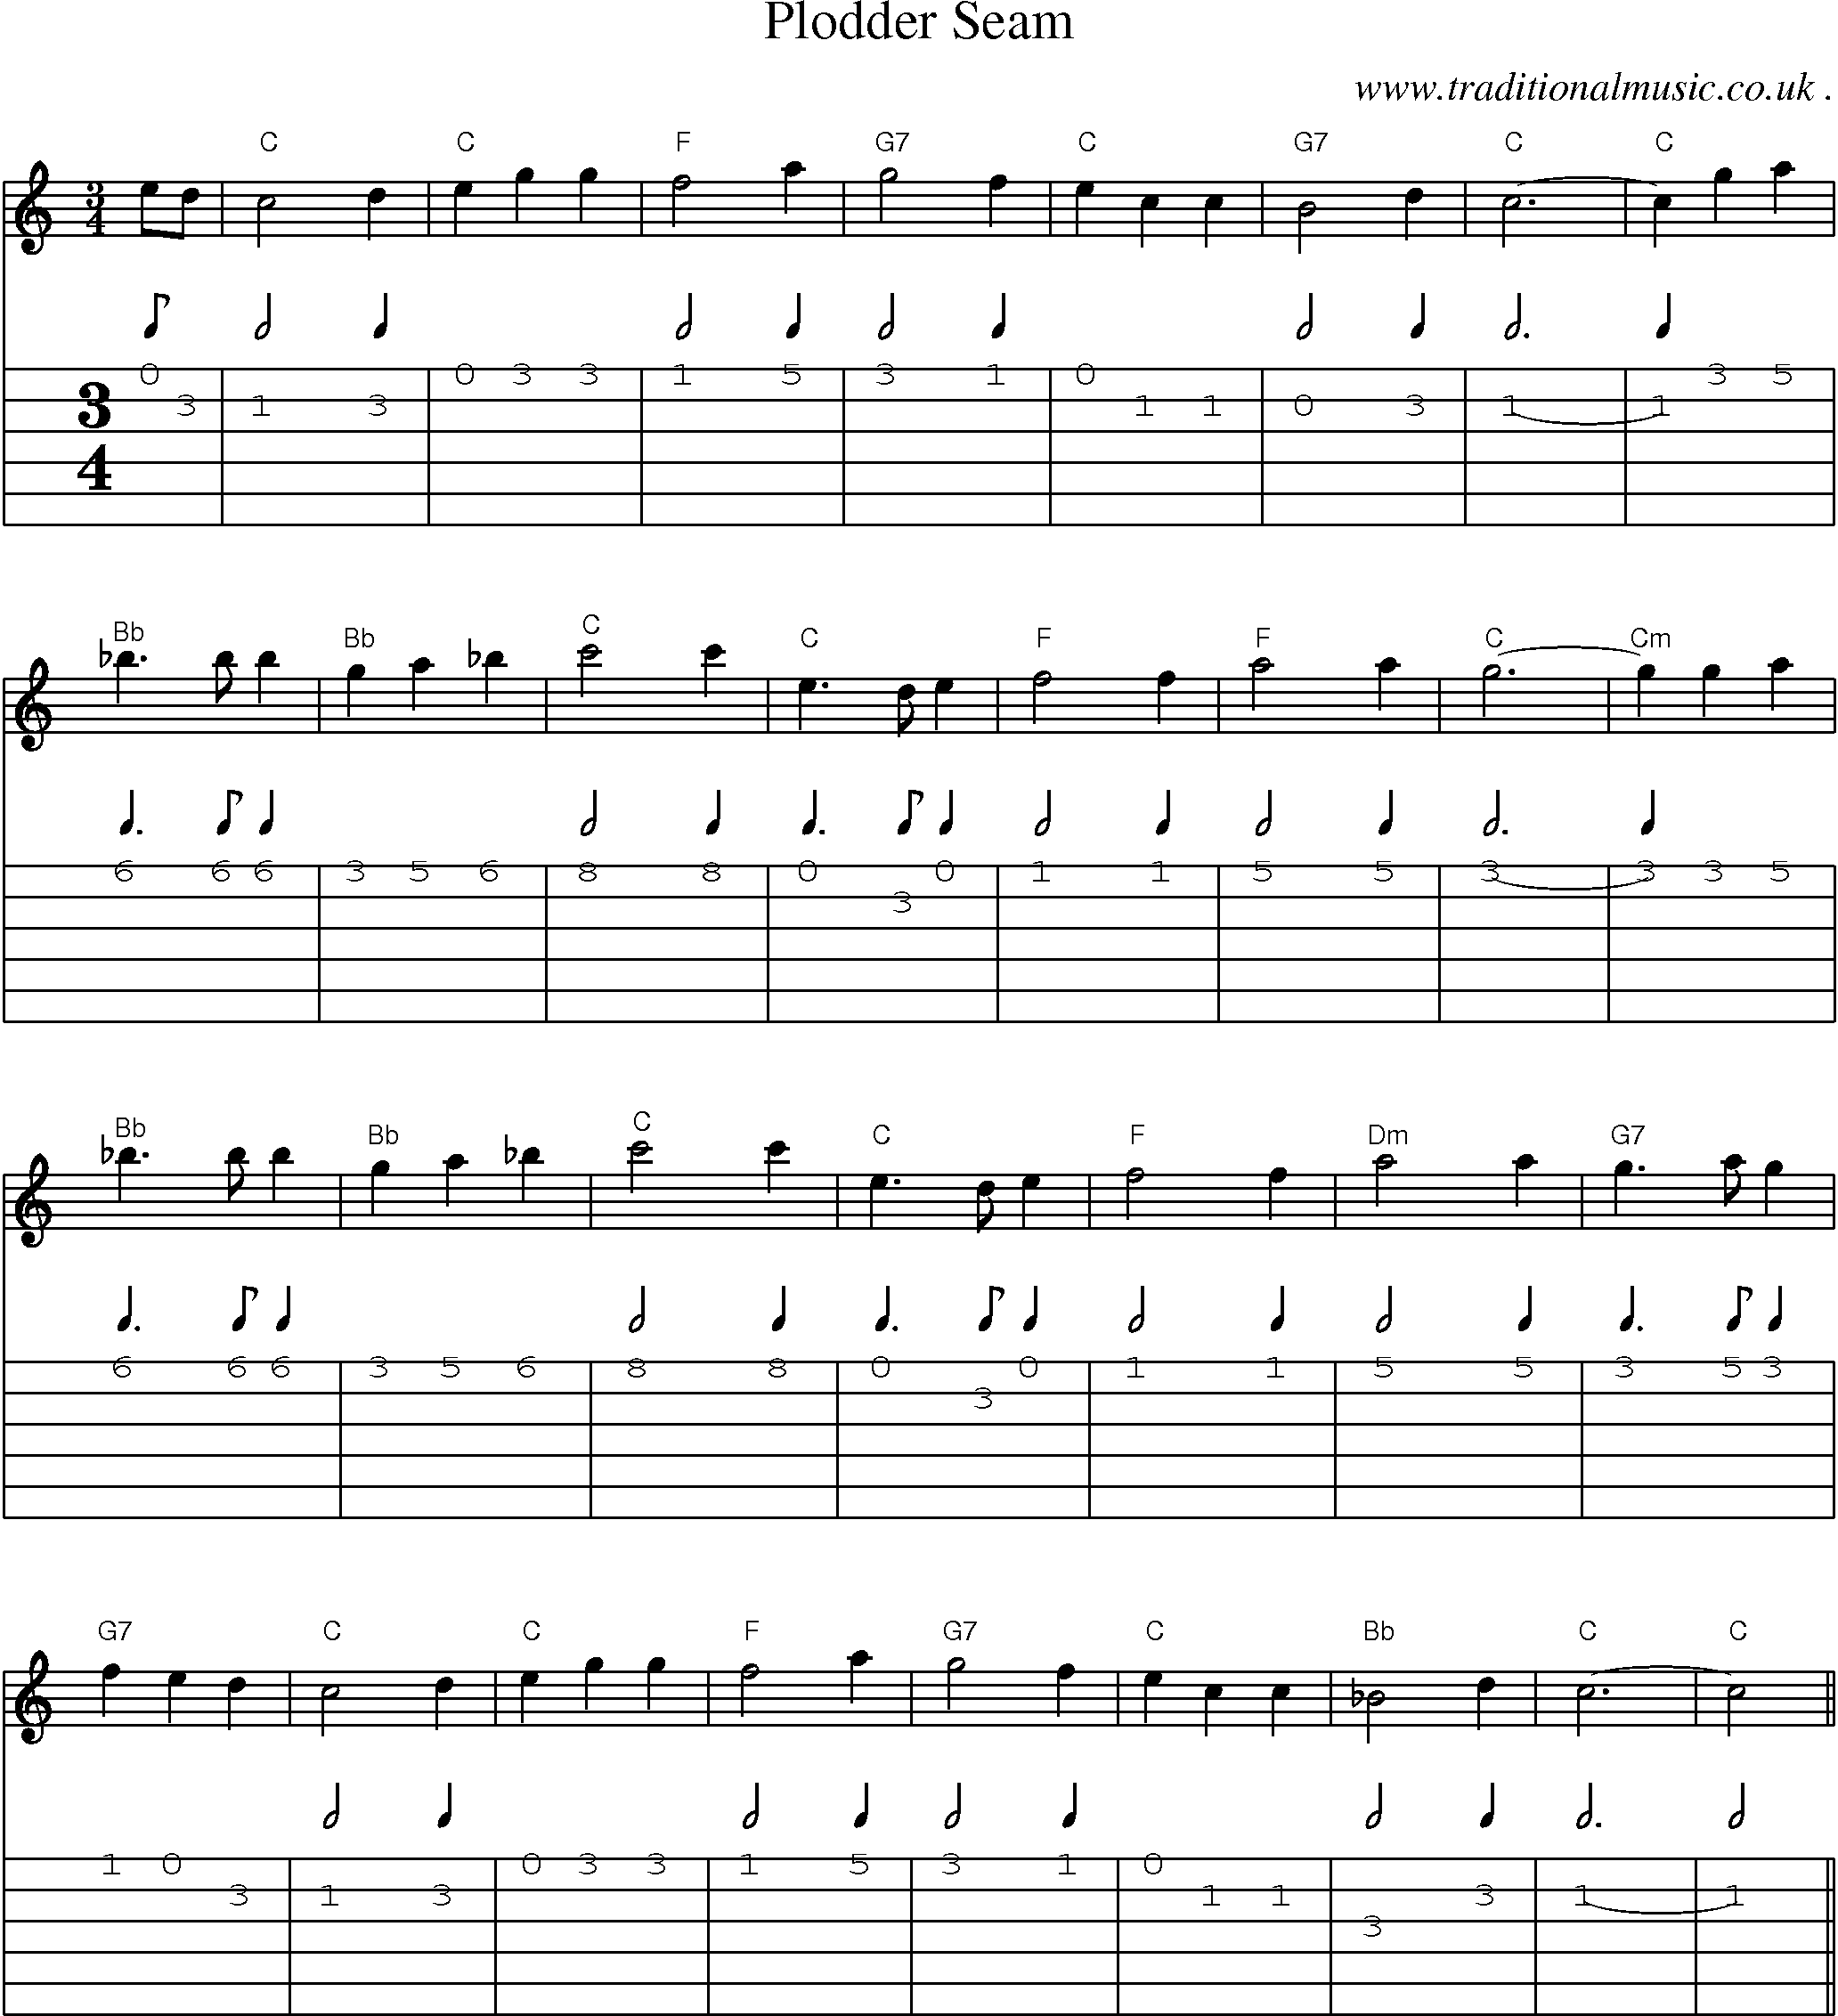 Sheet-Music and Guitar Tabs for Plodder Seam